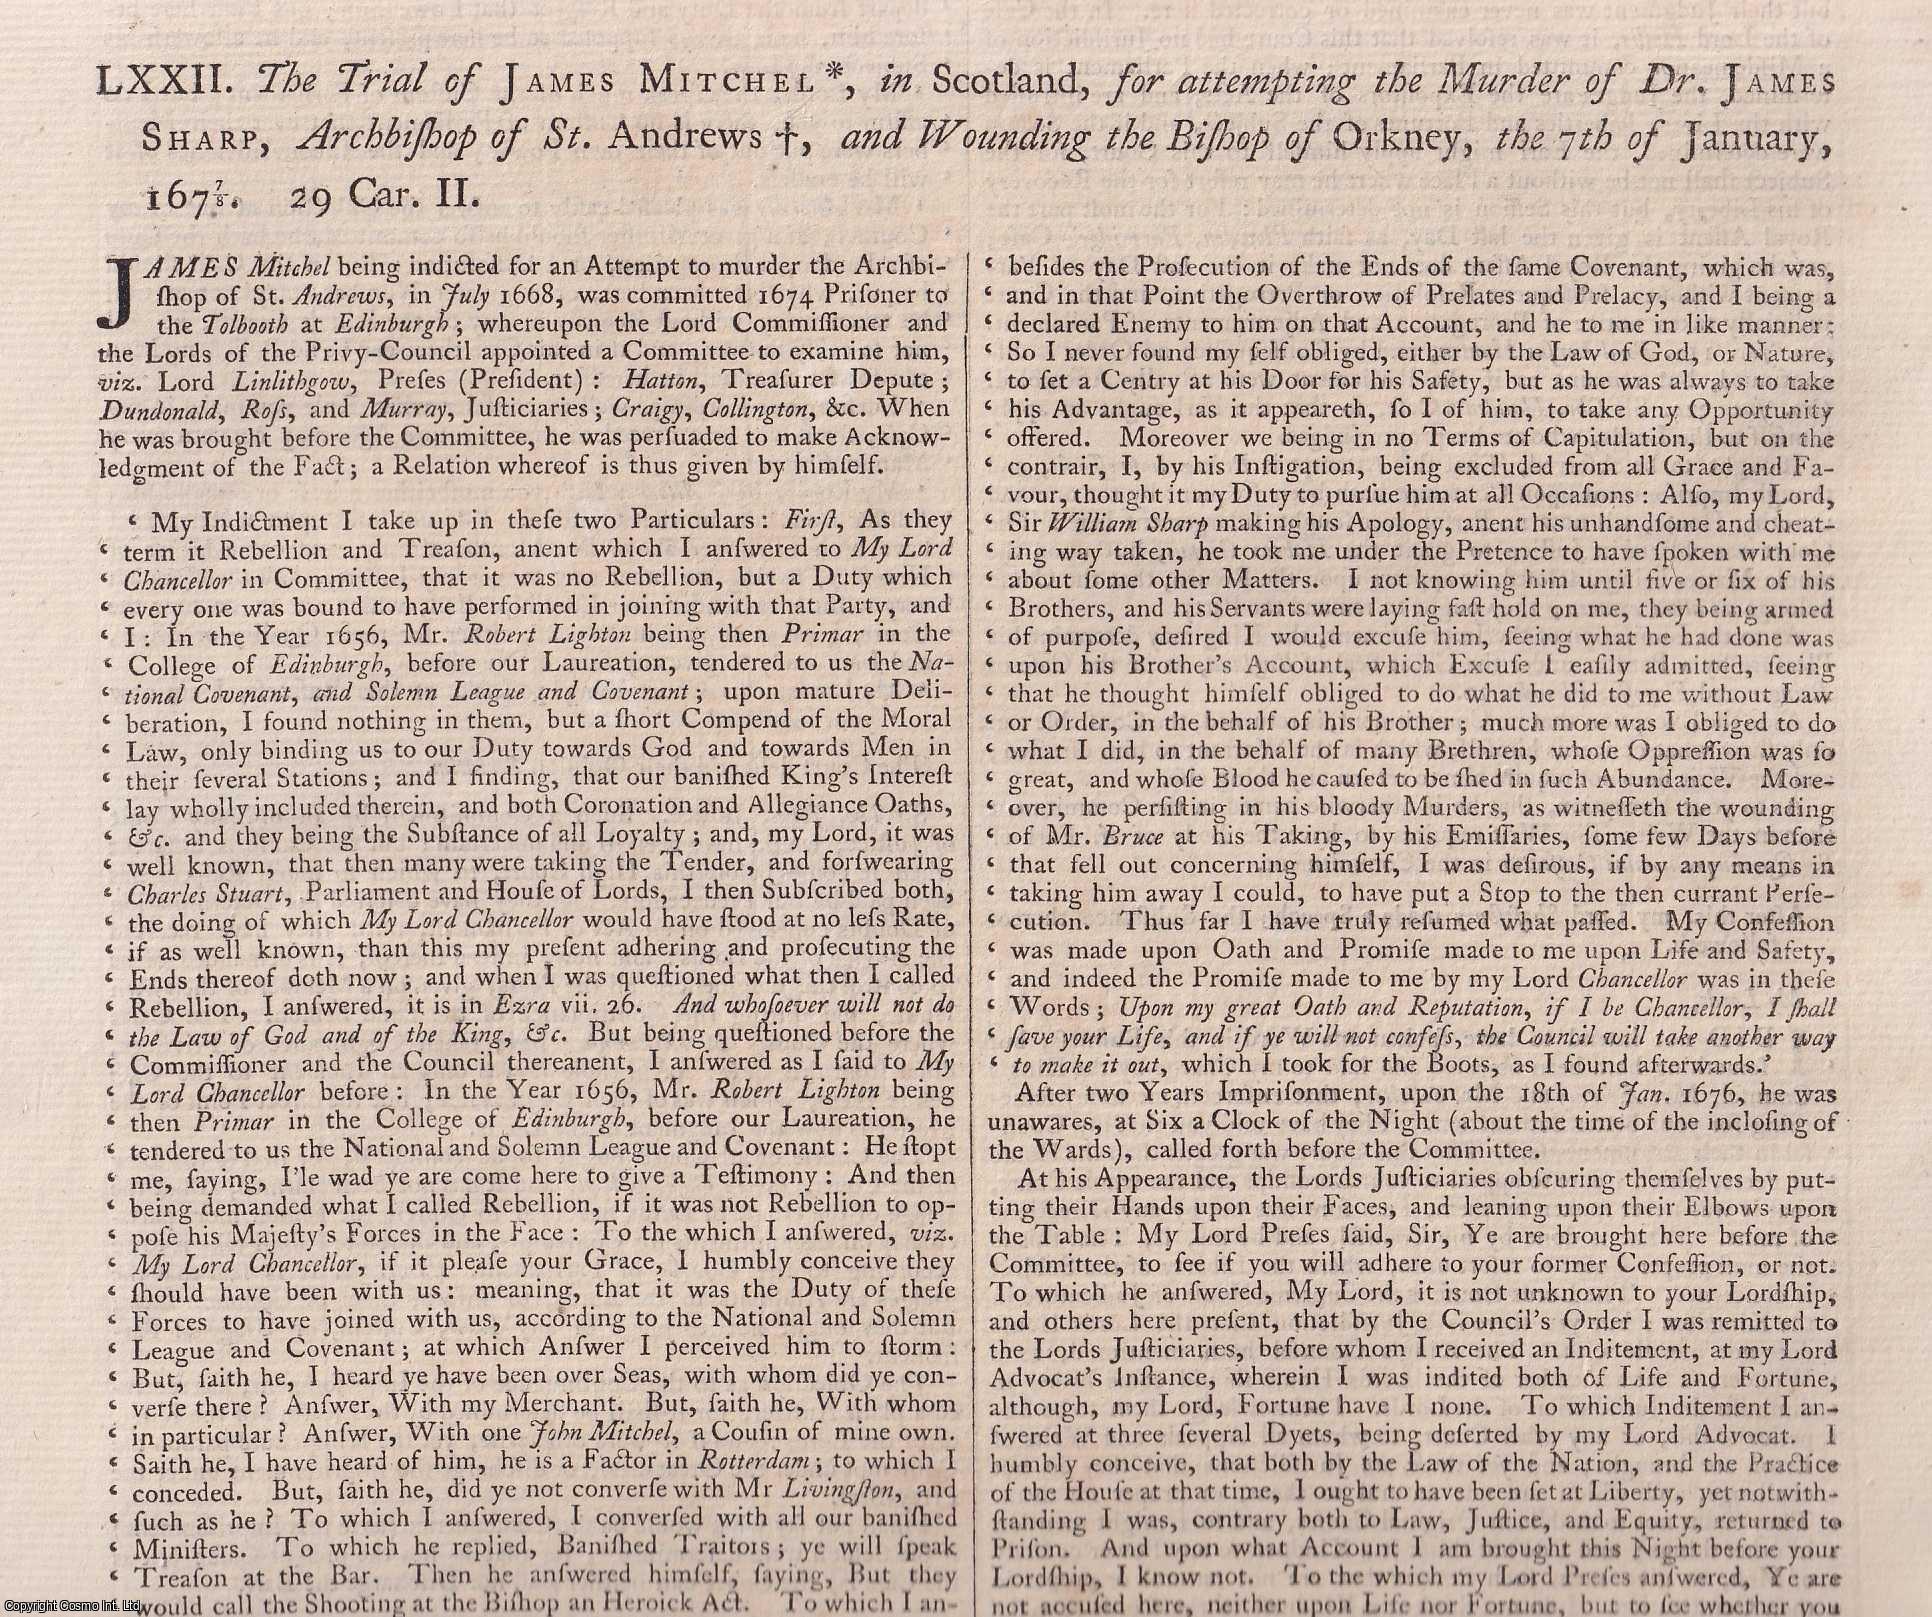 [Trial] - The Trial of James Mitchel, in Scotland, for attempting the Murder of Dr James Sharp, Archbishop of St Andrews, and actually wounding the Bishop of Orkney, the 7th of January, 1678. An original article from the Collected State Trials.